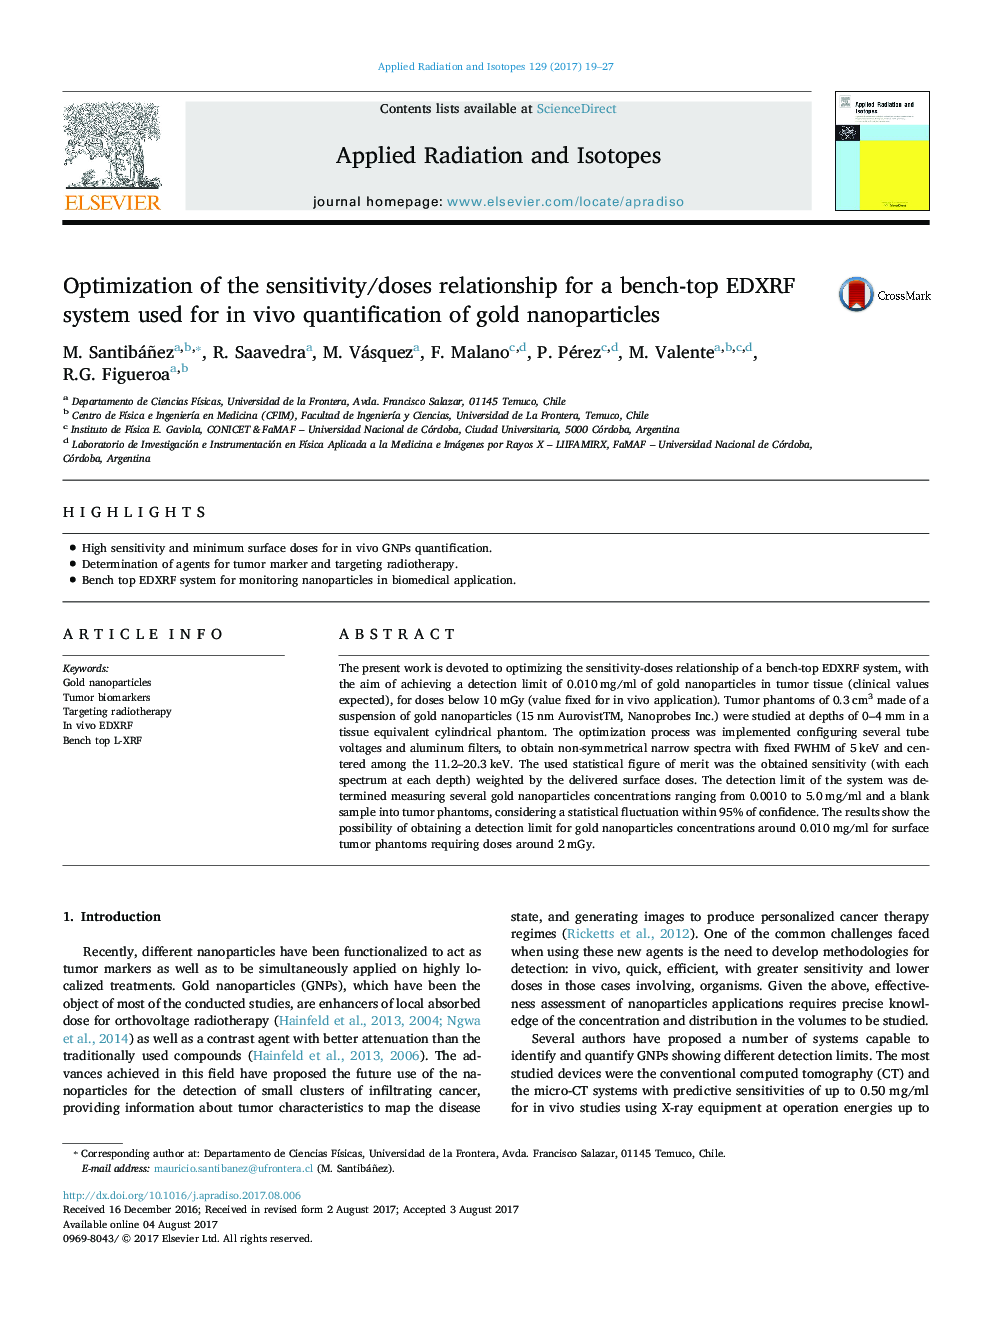 Optimization of the sensitivity/doses relationship for a bench-top EDXRF system used for in vivo quantification of gold nanoparticles